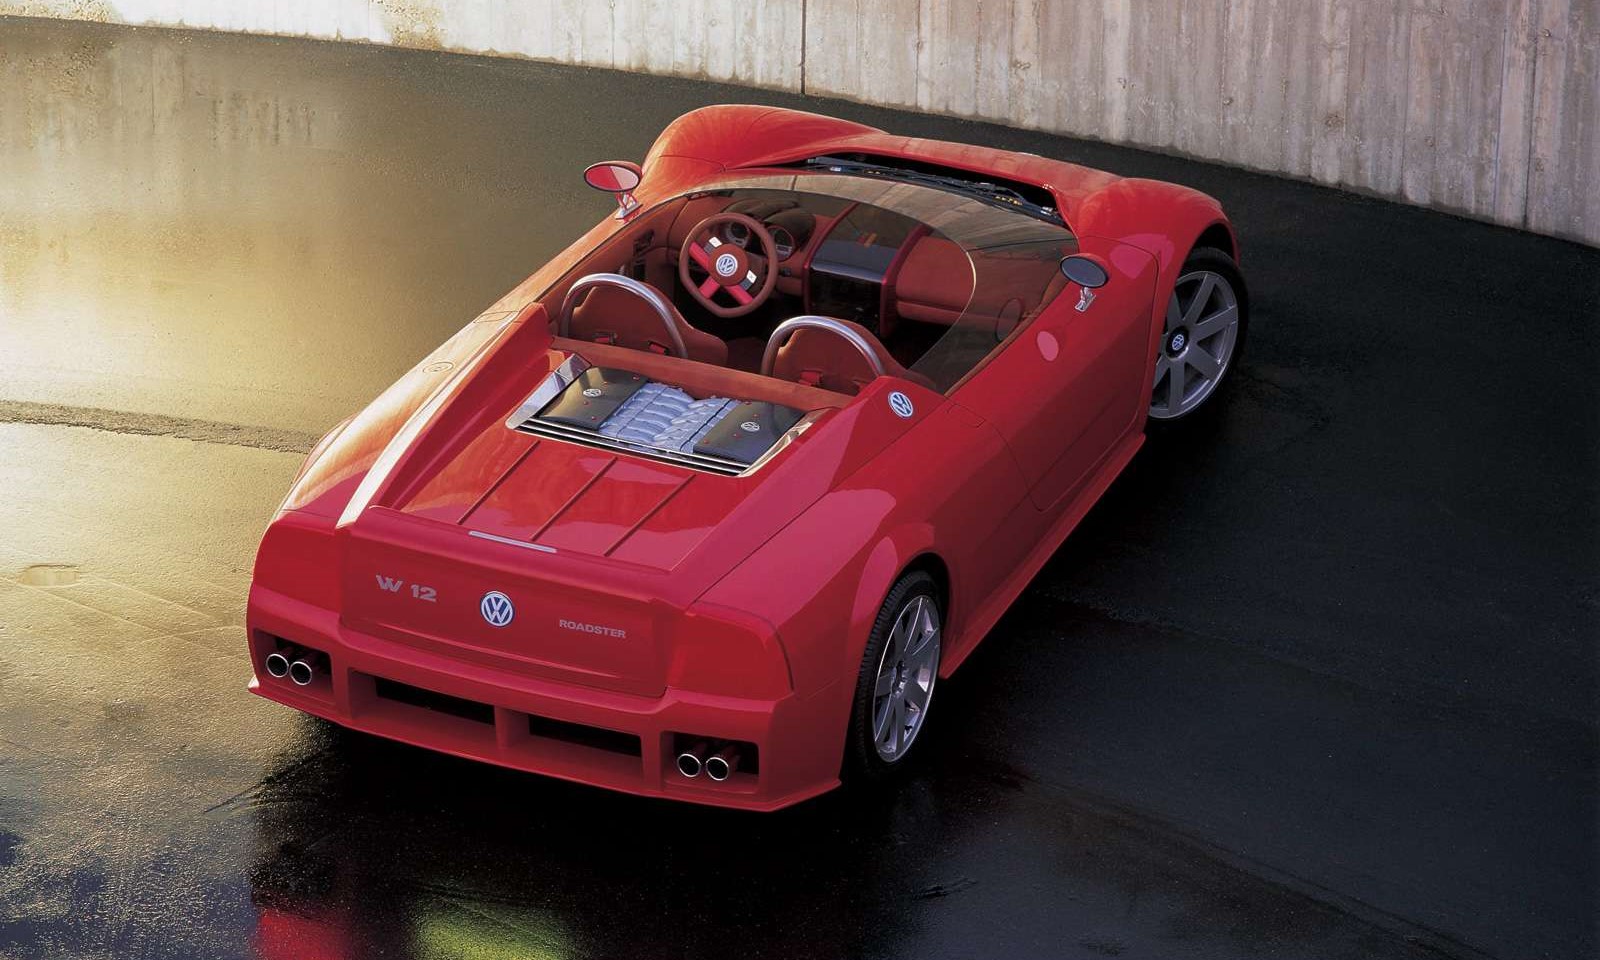 The Volkswagen W12 Concept Roadster from 1998.